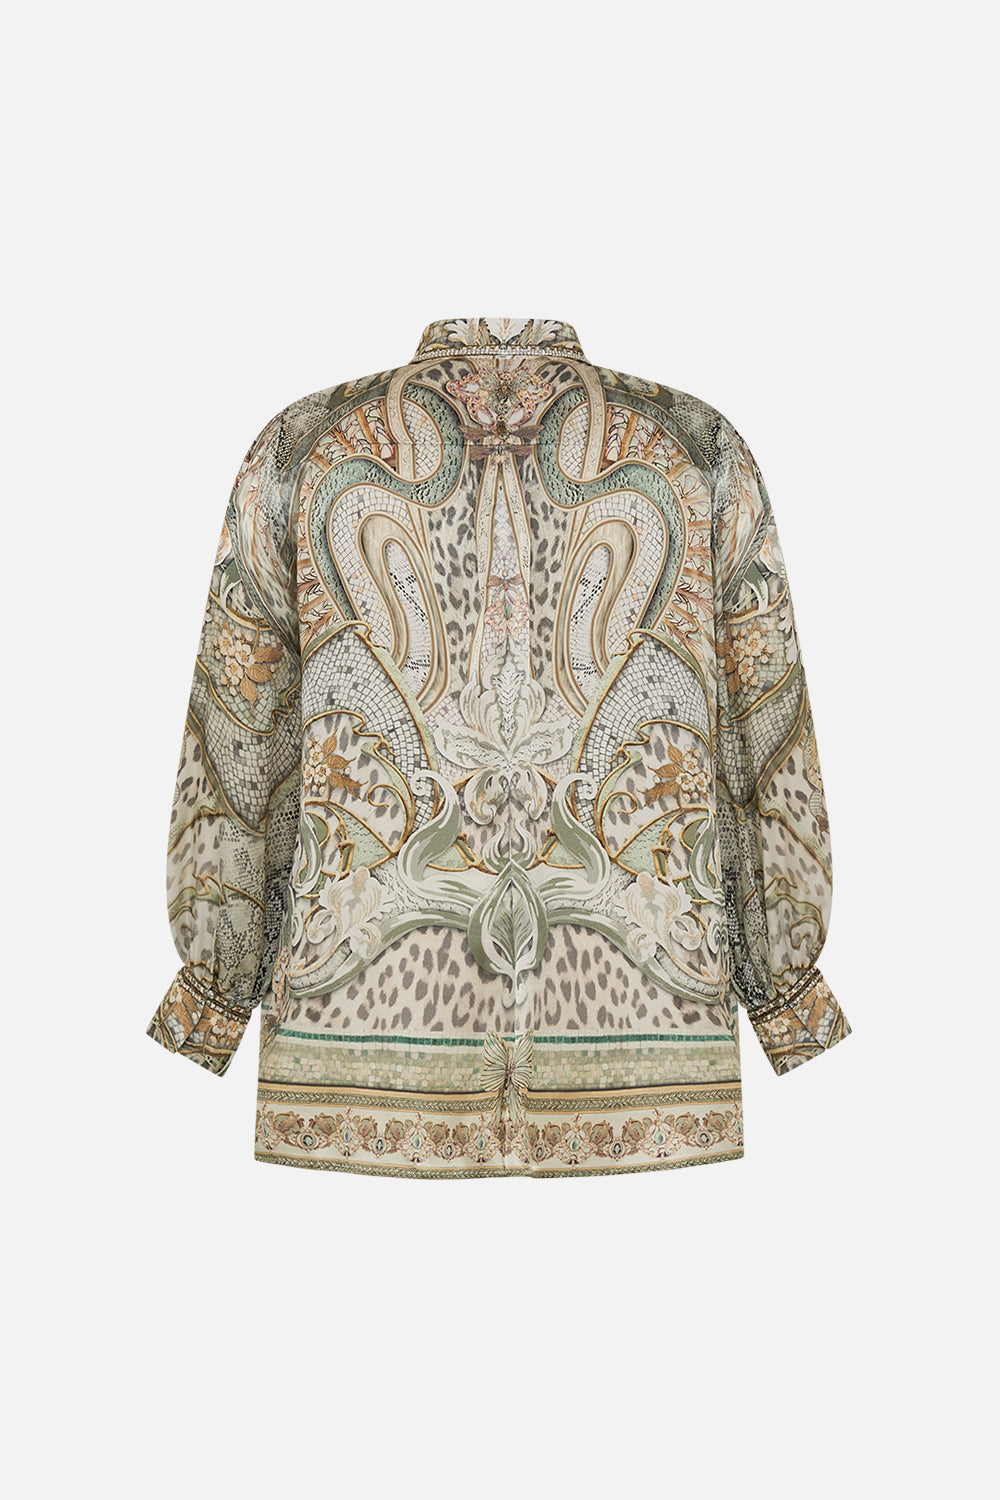 CAMILLA silk blouse in Ivory Tower tales print